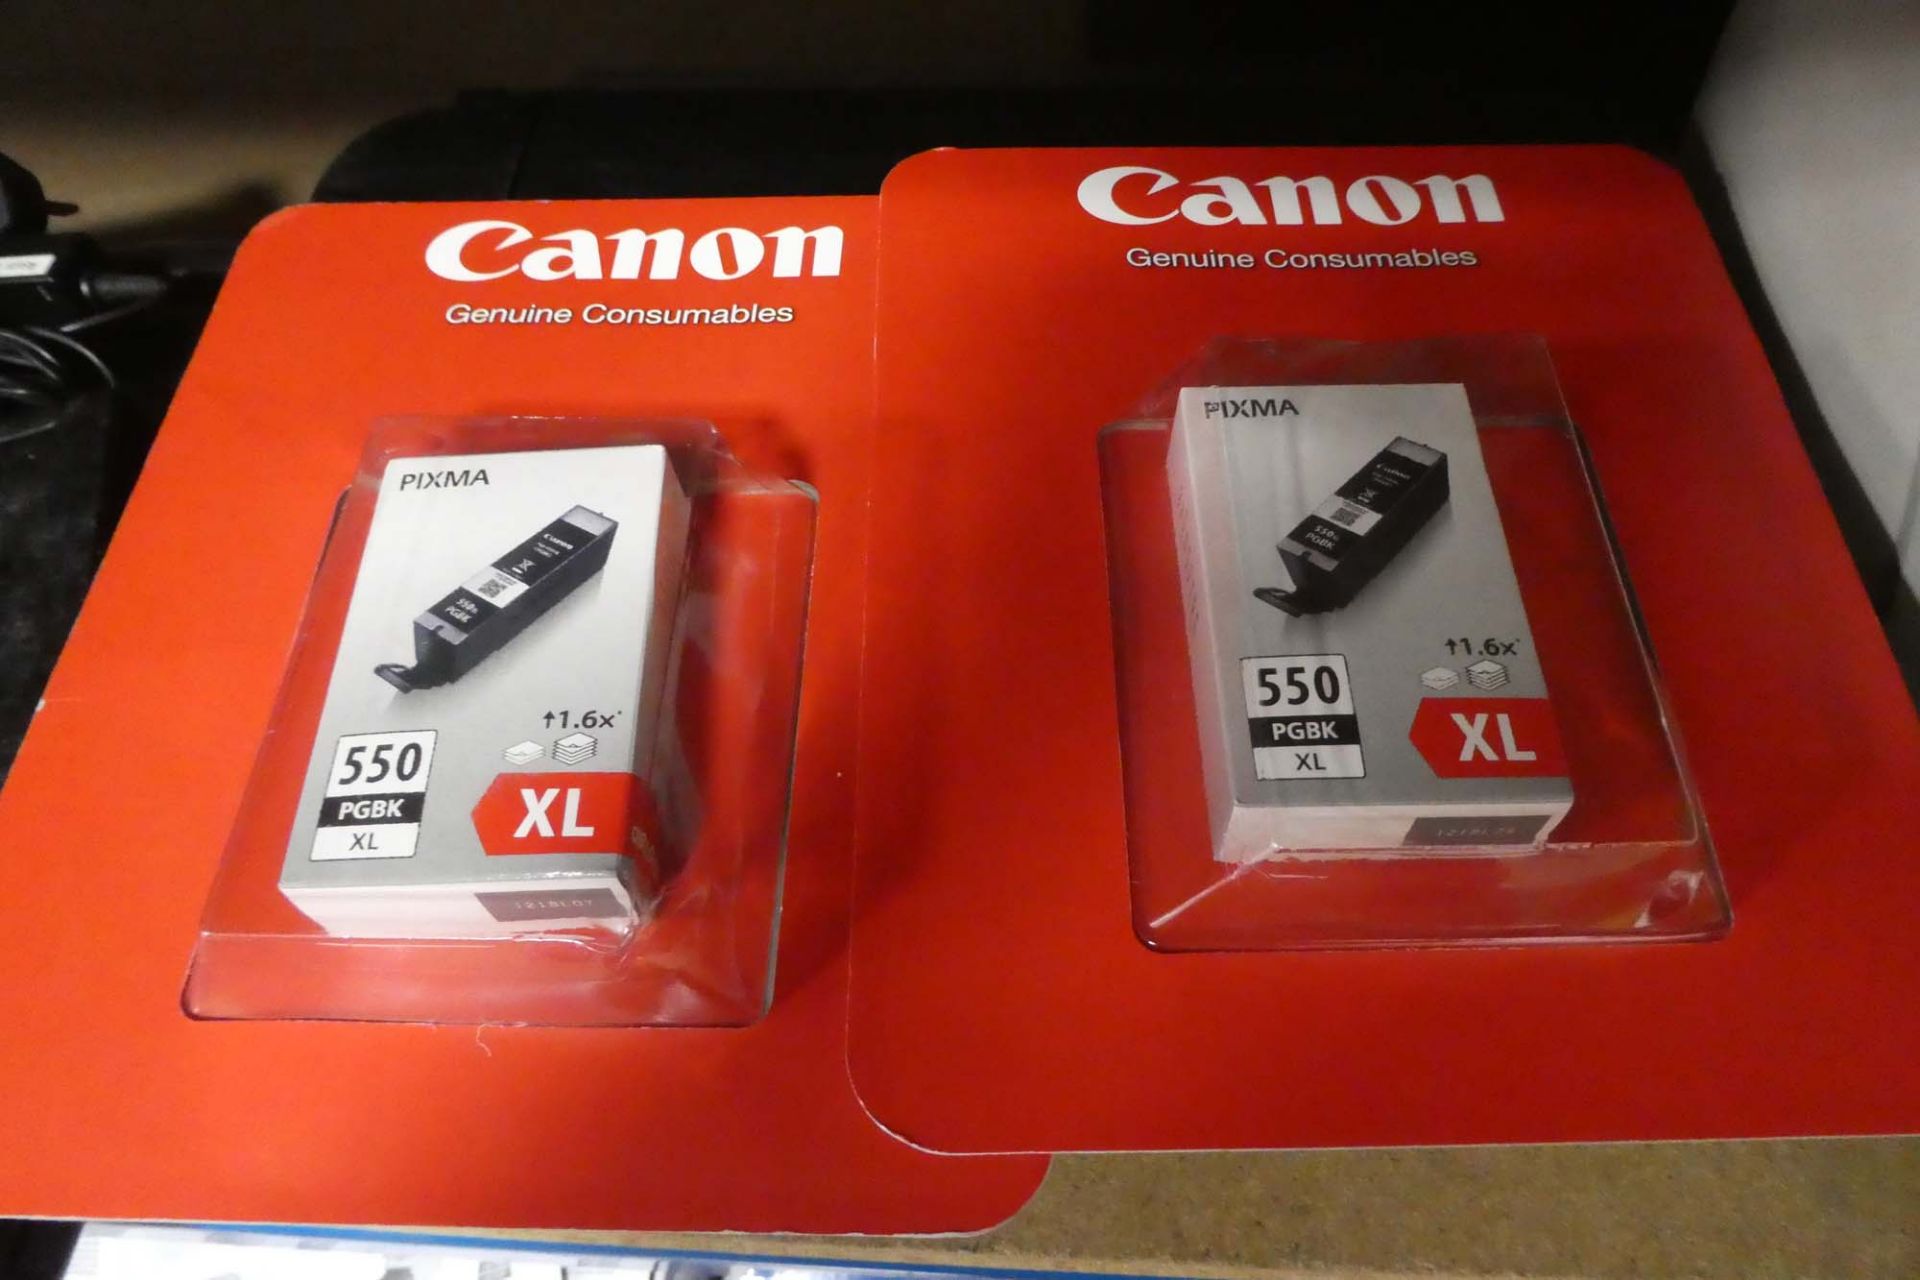 Canon Pixma G3501 printer together with 2 Pixma 550 black XL colour ink cartridges in blister packs - Image 2 of 2